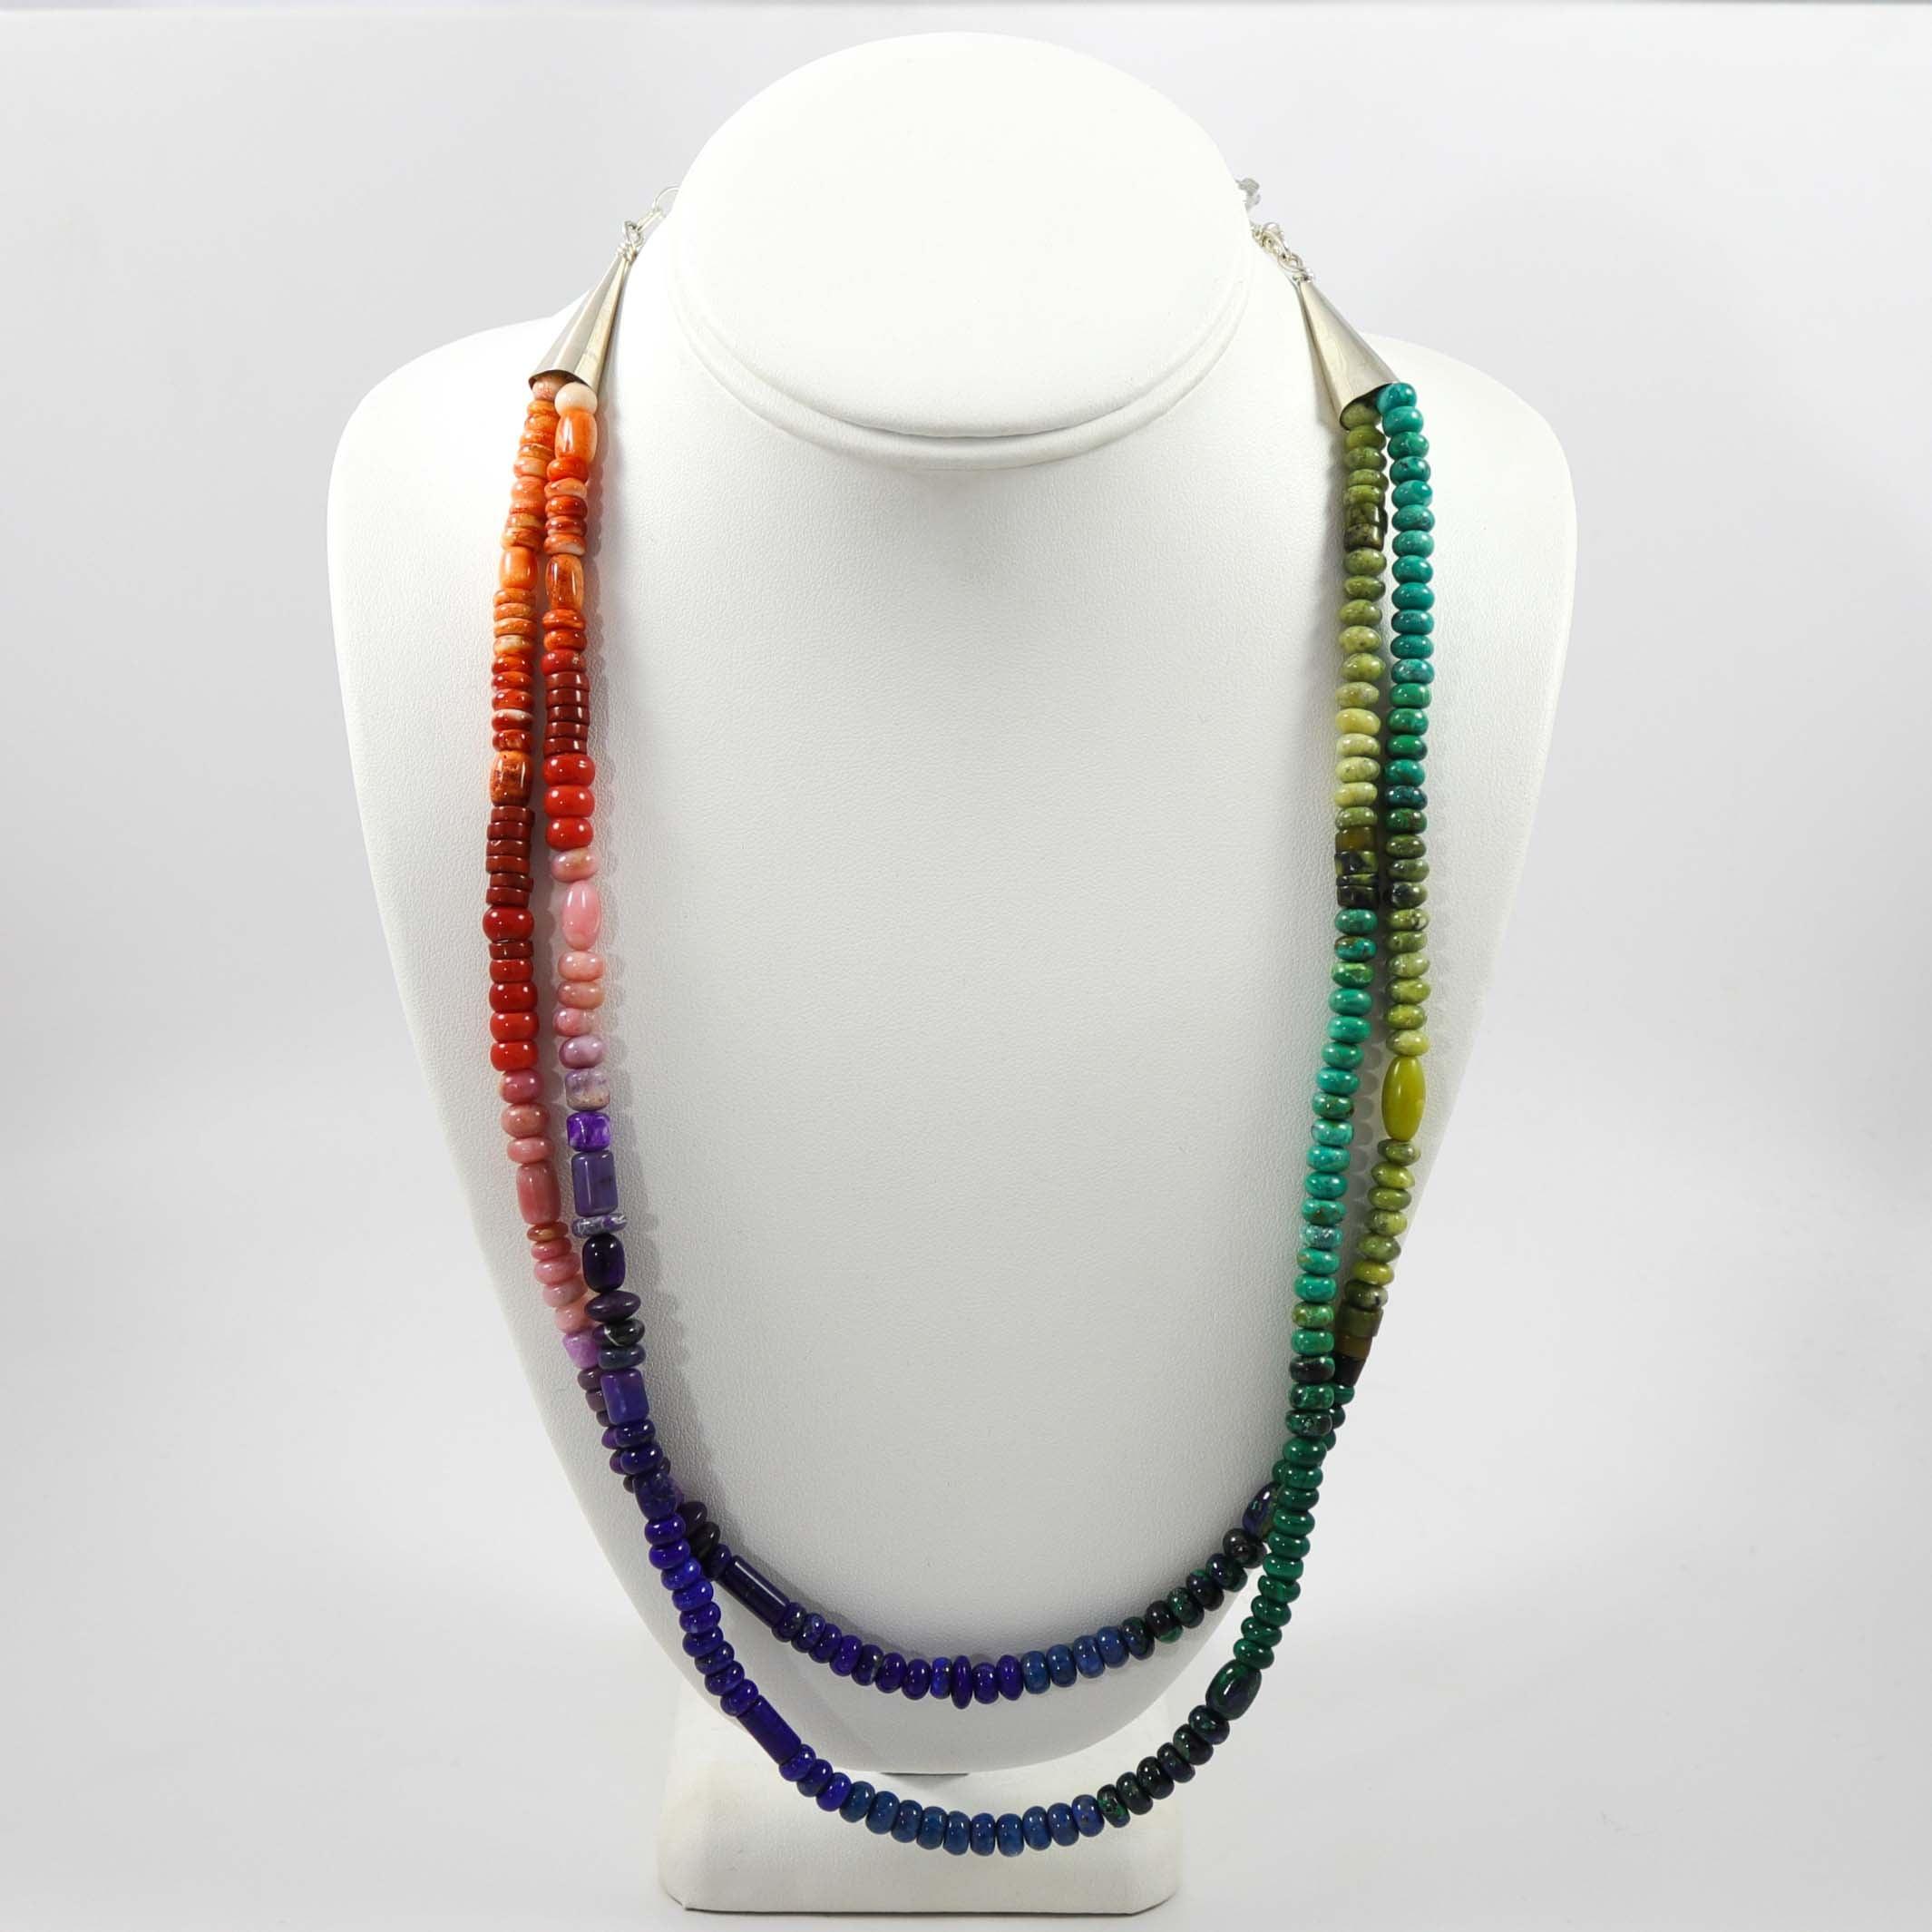 Summer must have: the rainbow jewelry | Theeyeofjewelry.com